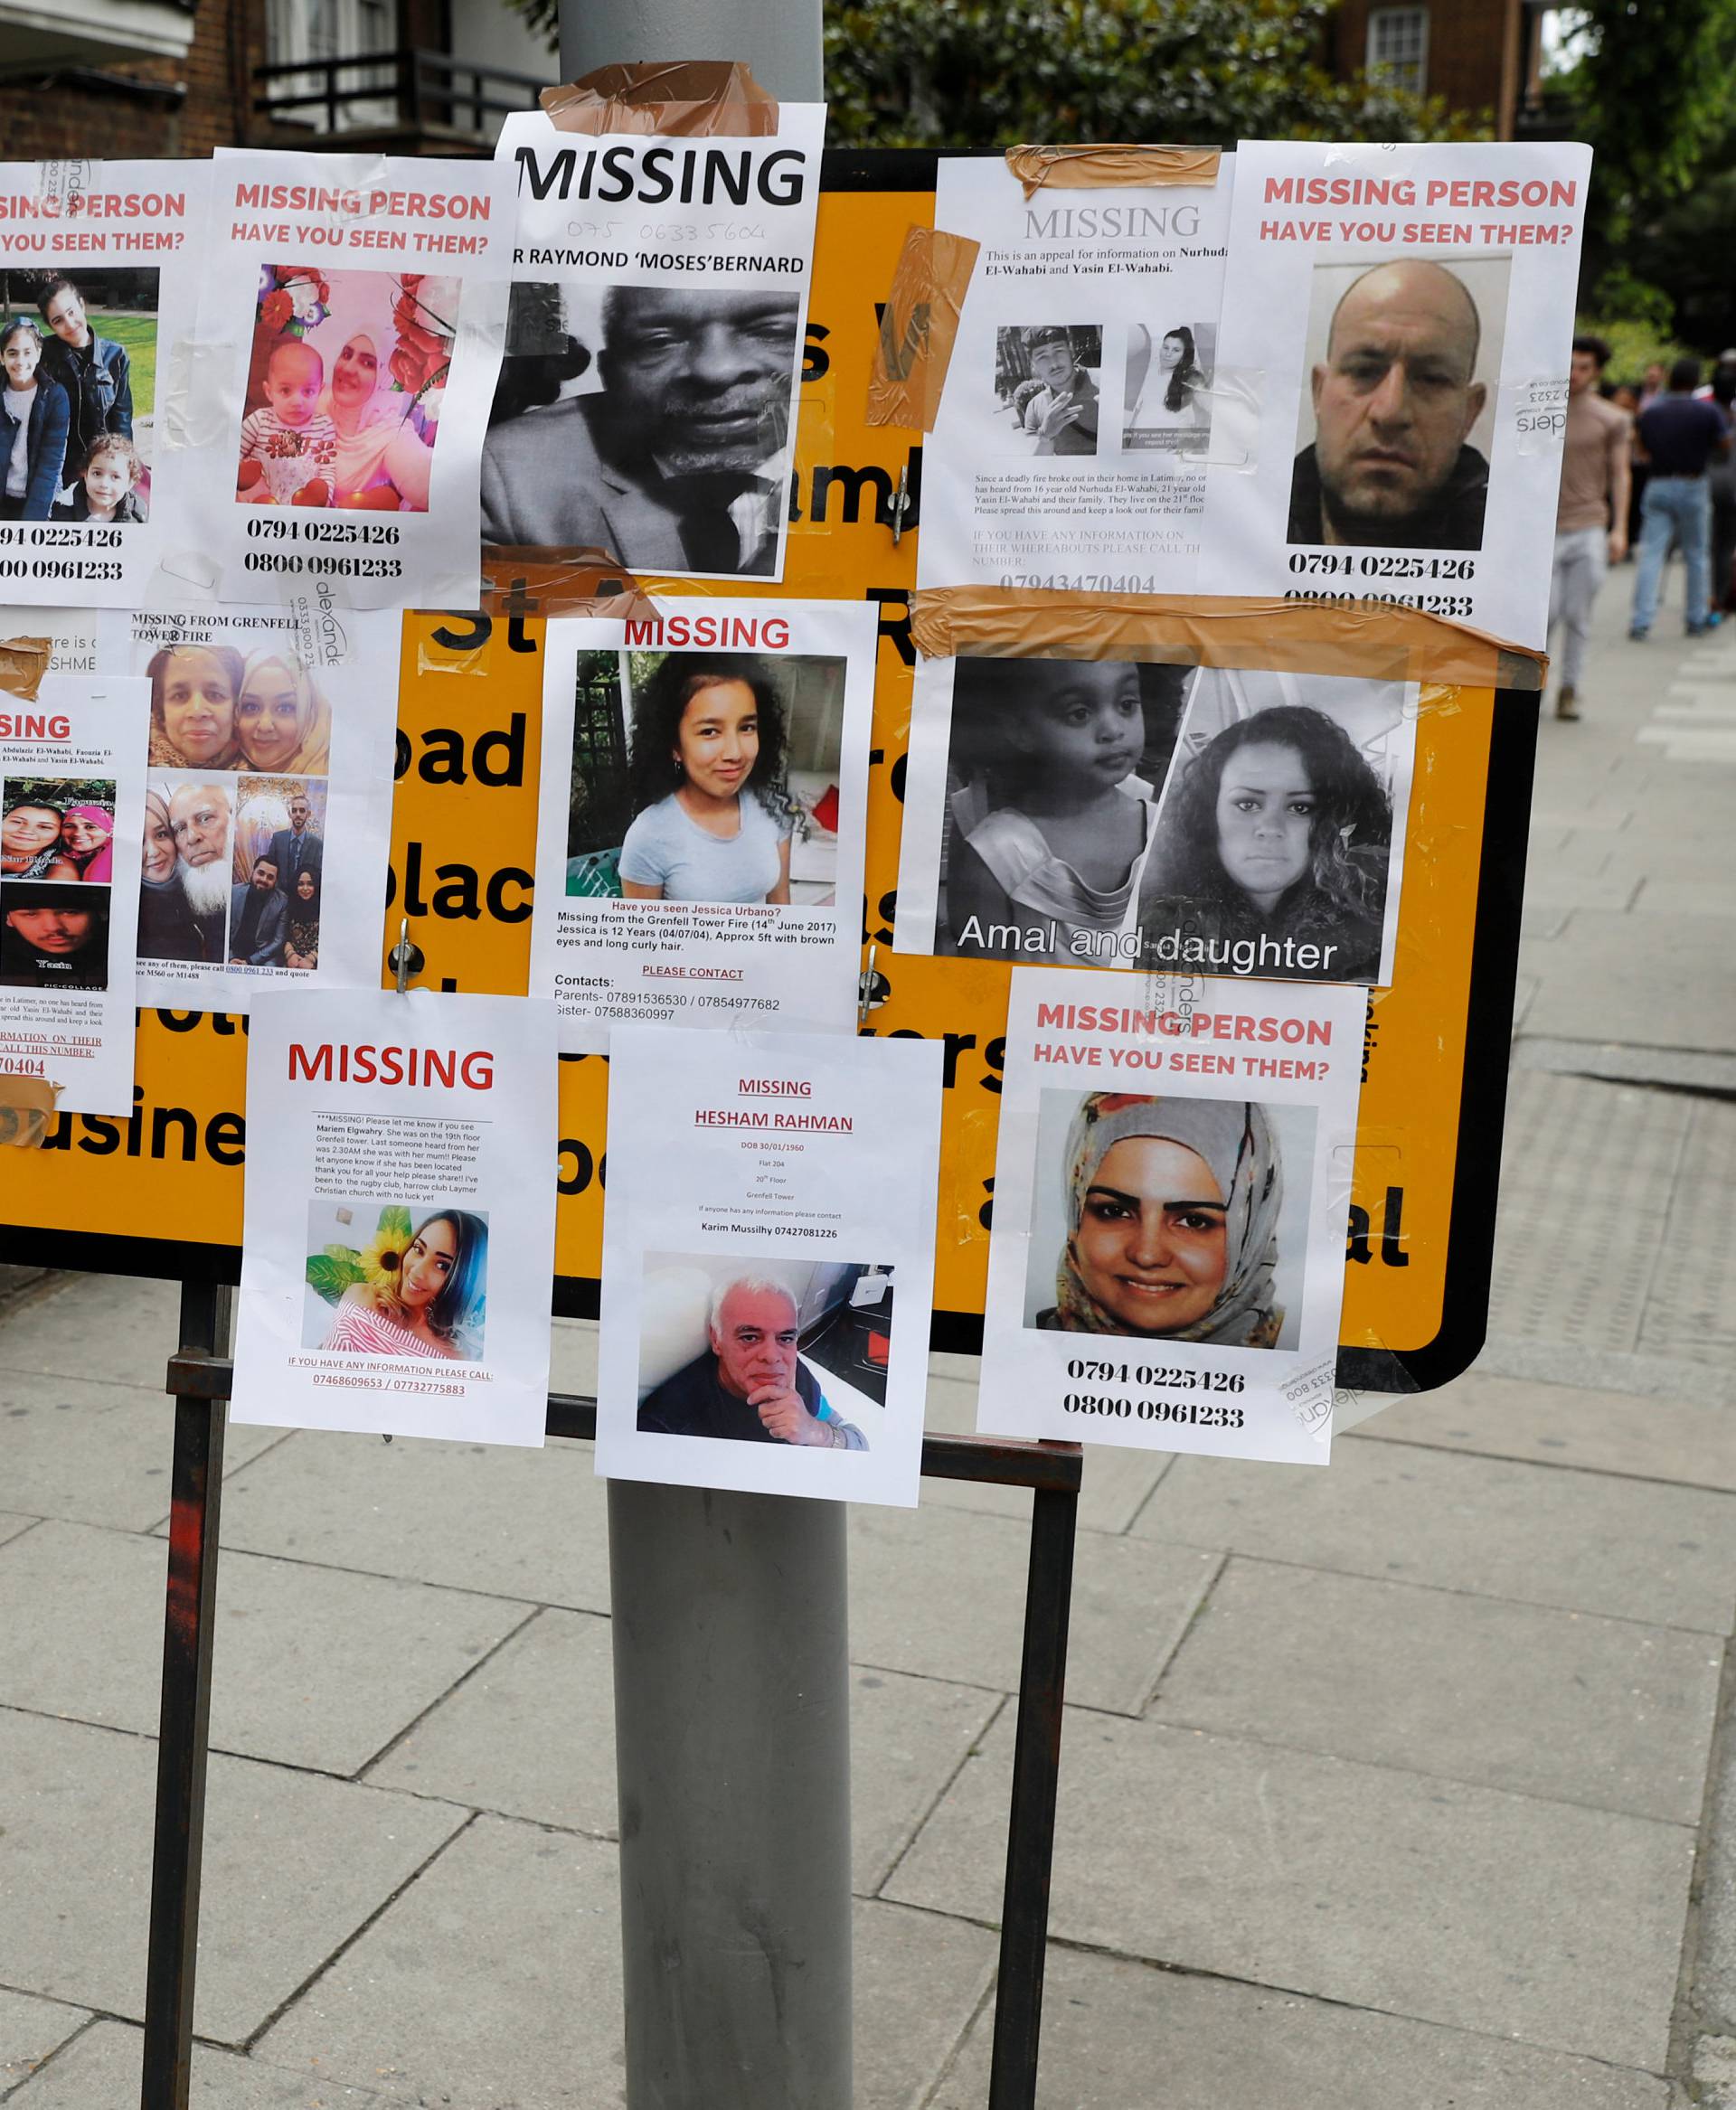 A woman stands by missing person posters near The Grenfell Tower block, destroyed by fire, in north Kensington, West London